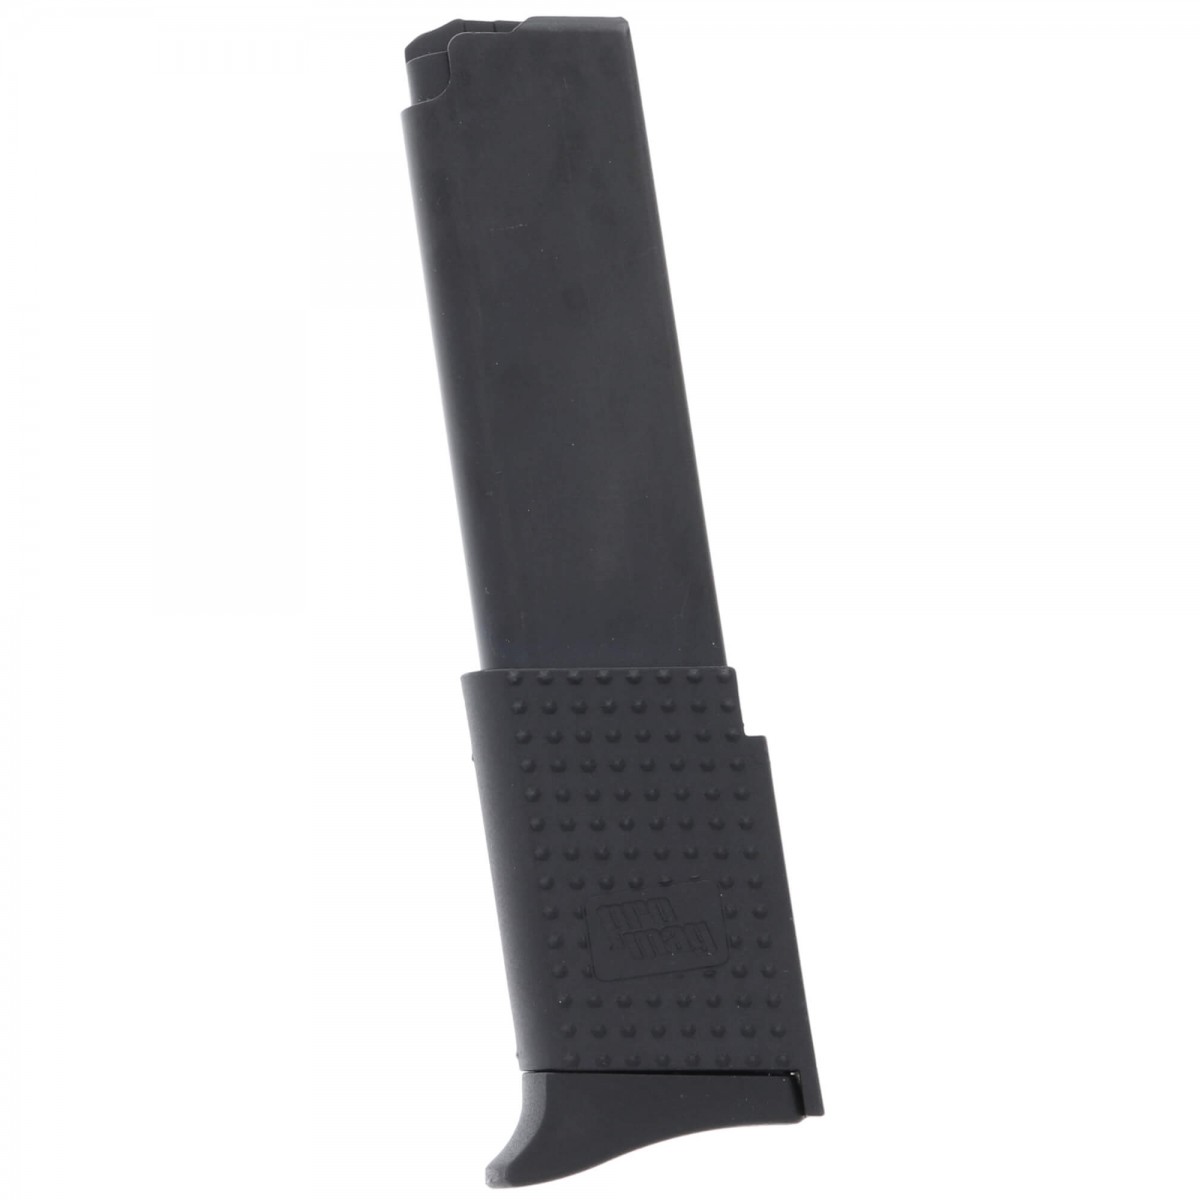 Promag Ruger Lcp 380 Acp 10 Round Magazine Extended